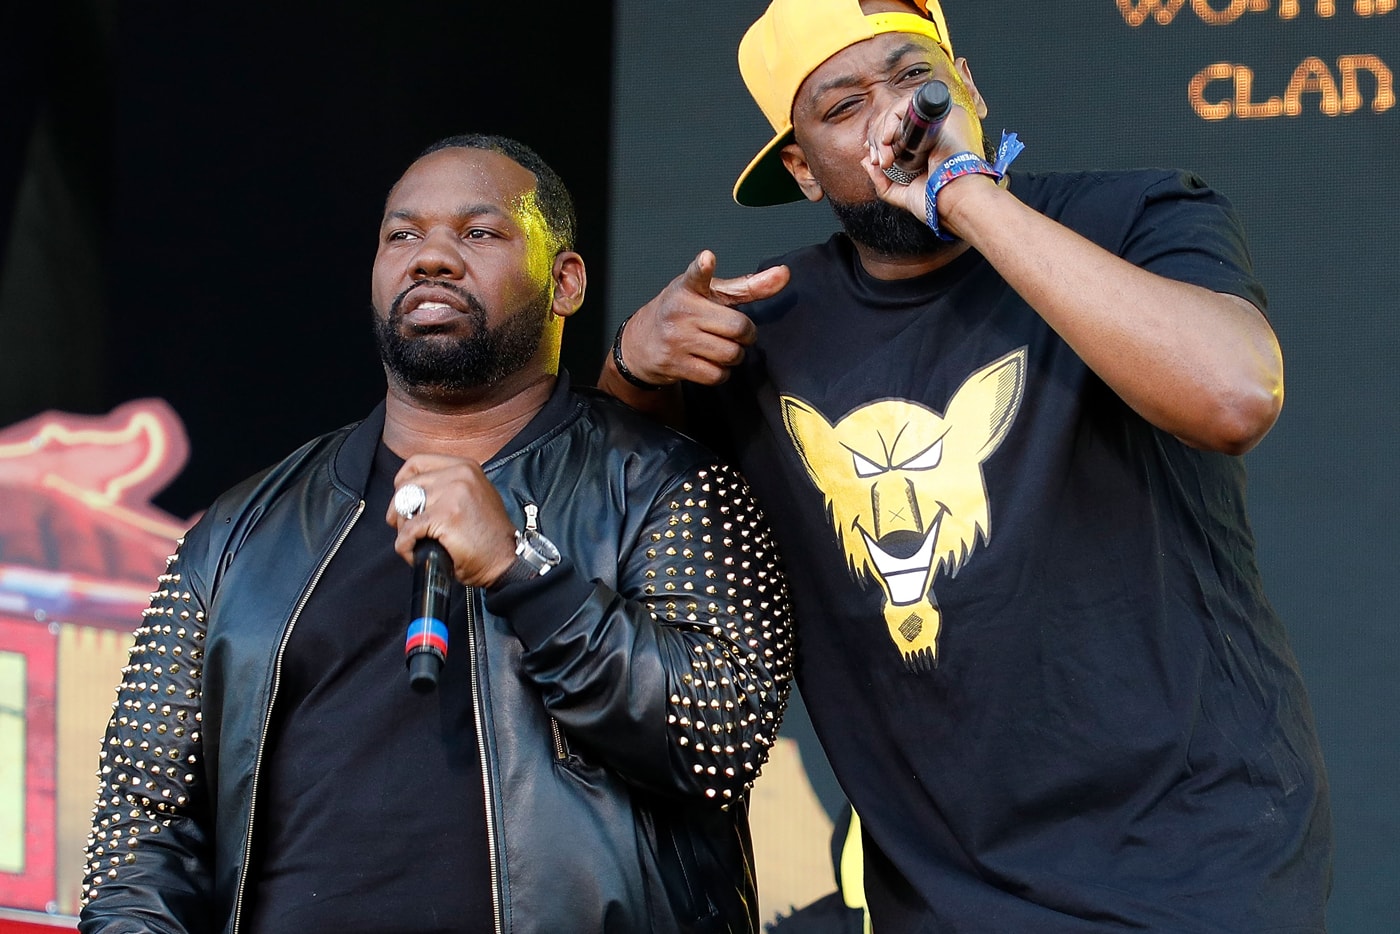 Raekwon Ghostface Killah "This Is What It Comes Too" Remix Tracks Wu-Tang Clan Rapper